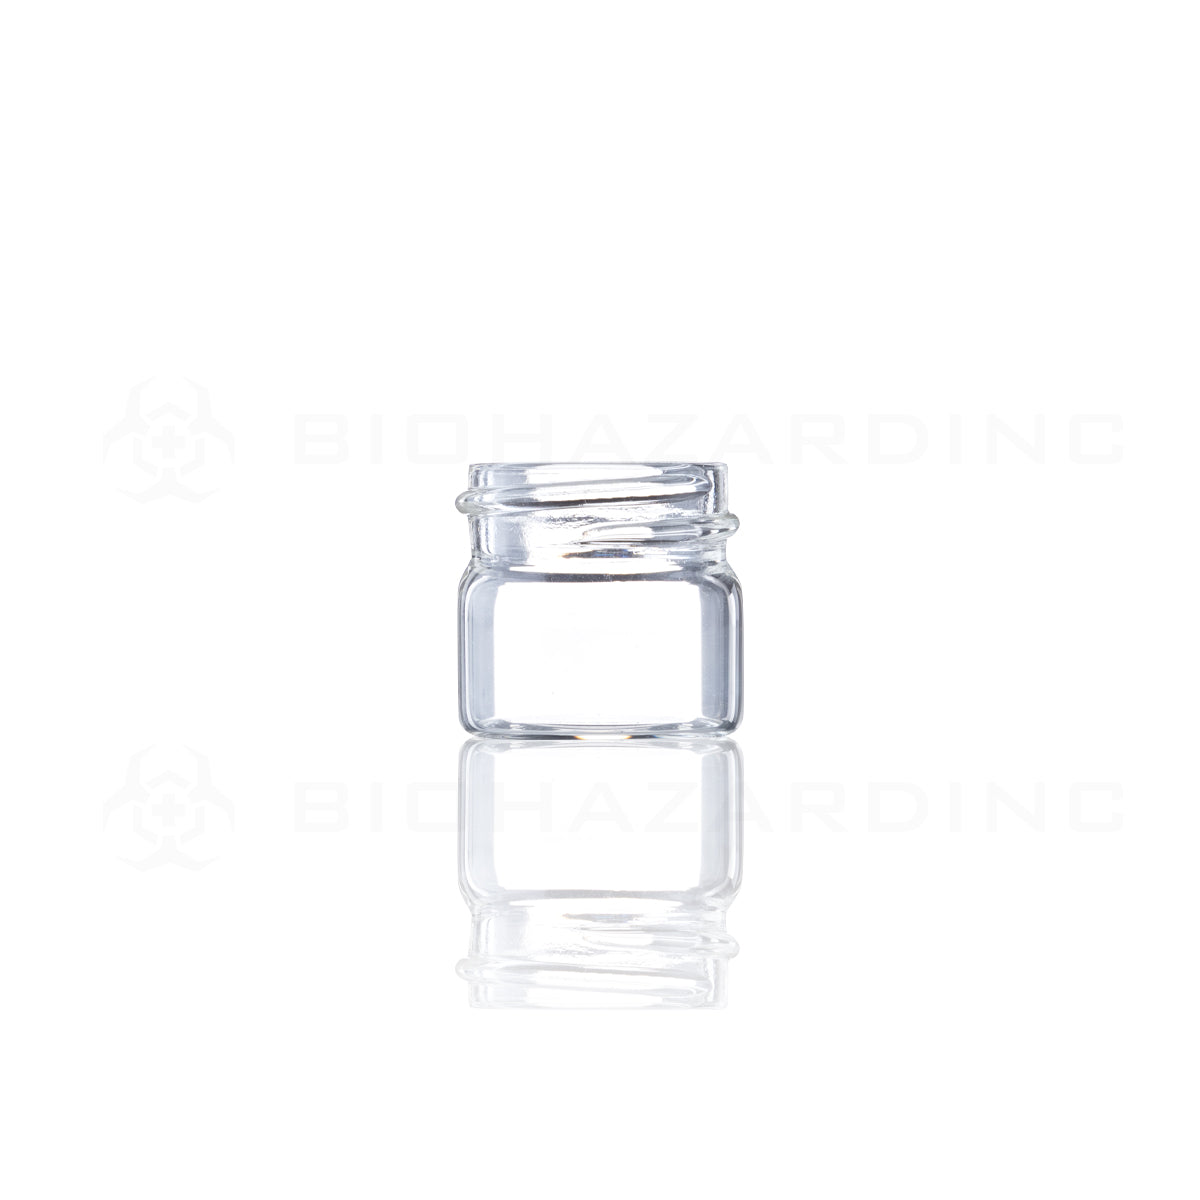 Concentrate Containers | Concentrate Glass Jar - Clear | 24mm - 5mL - 144 Count  Biohazard Inc   